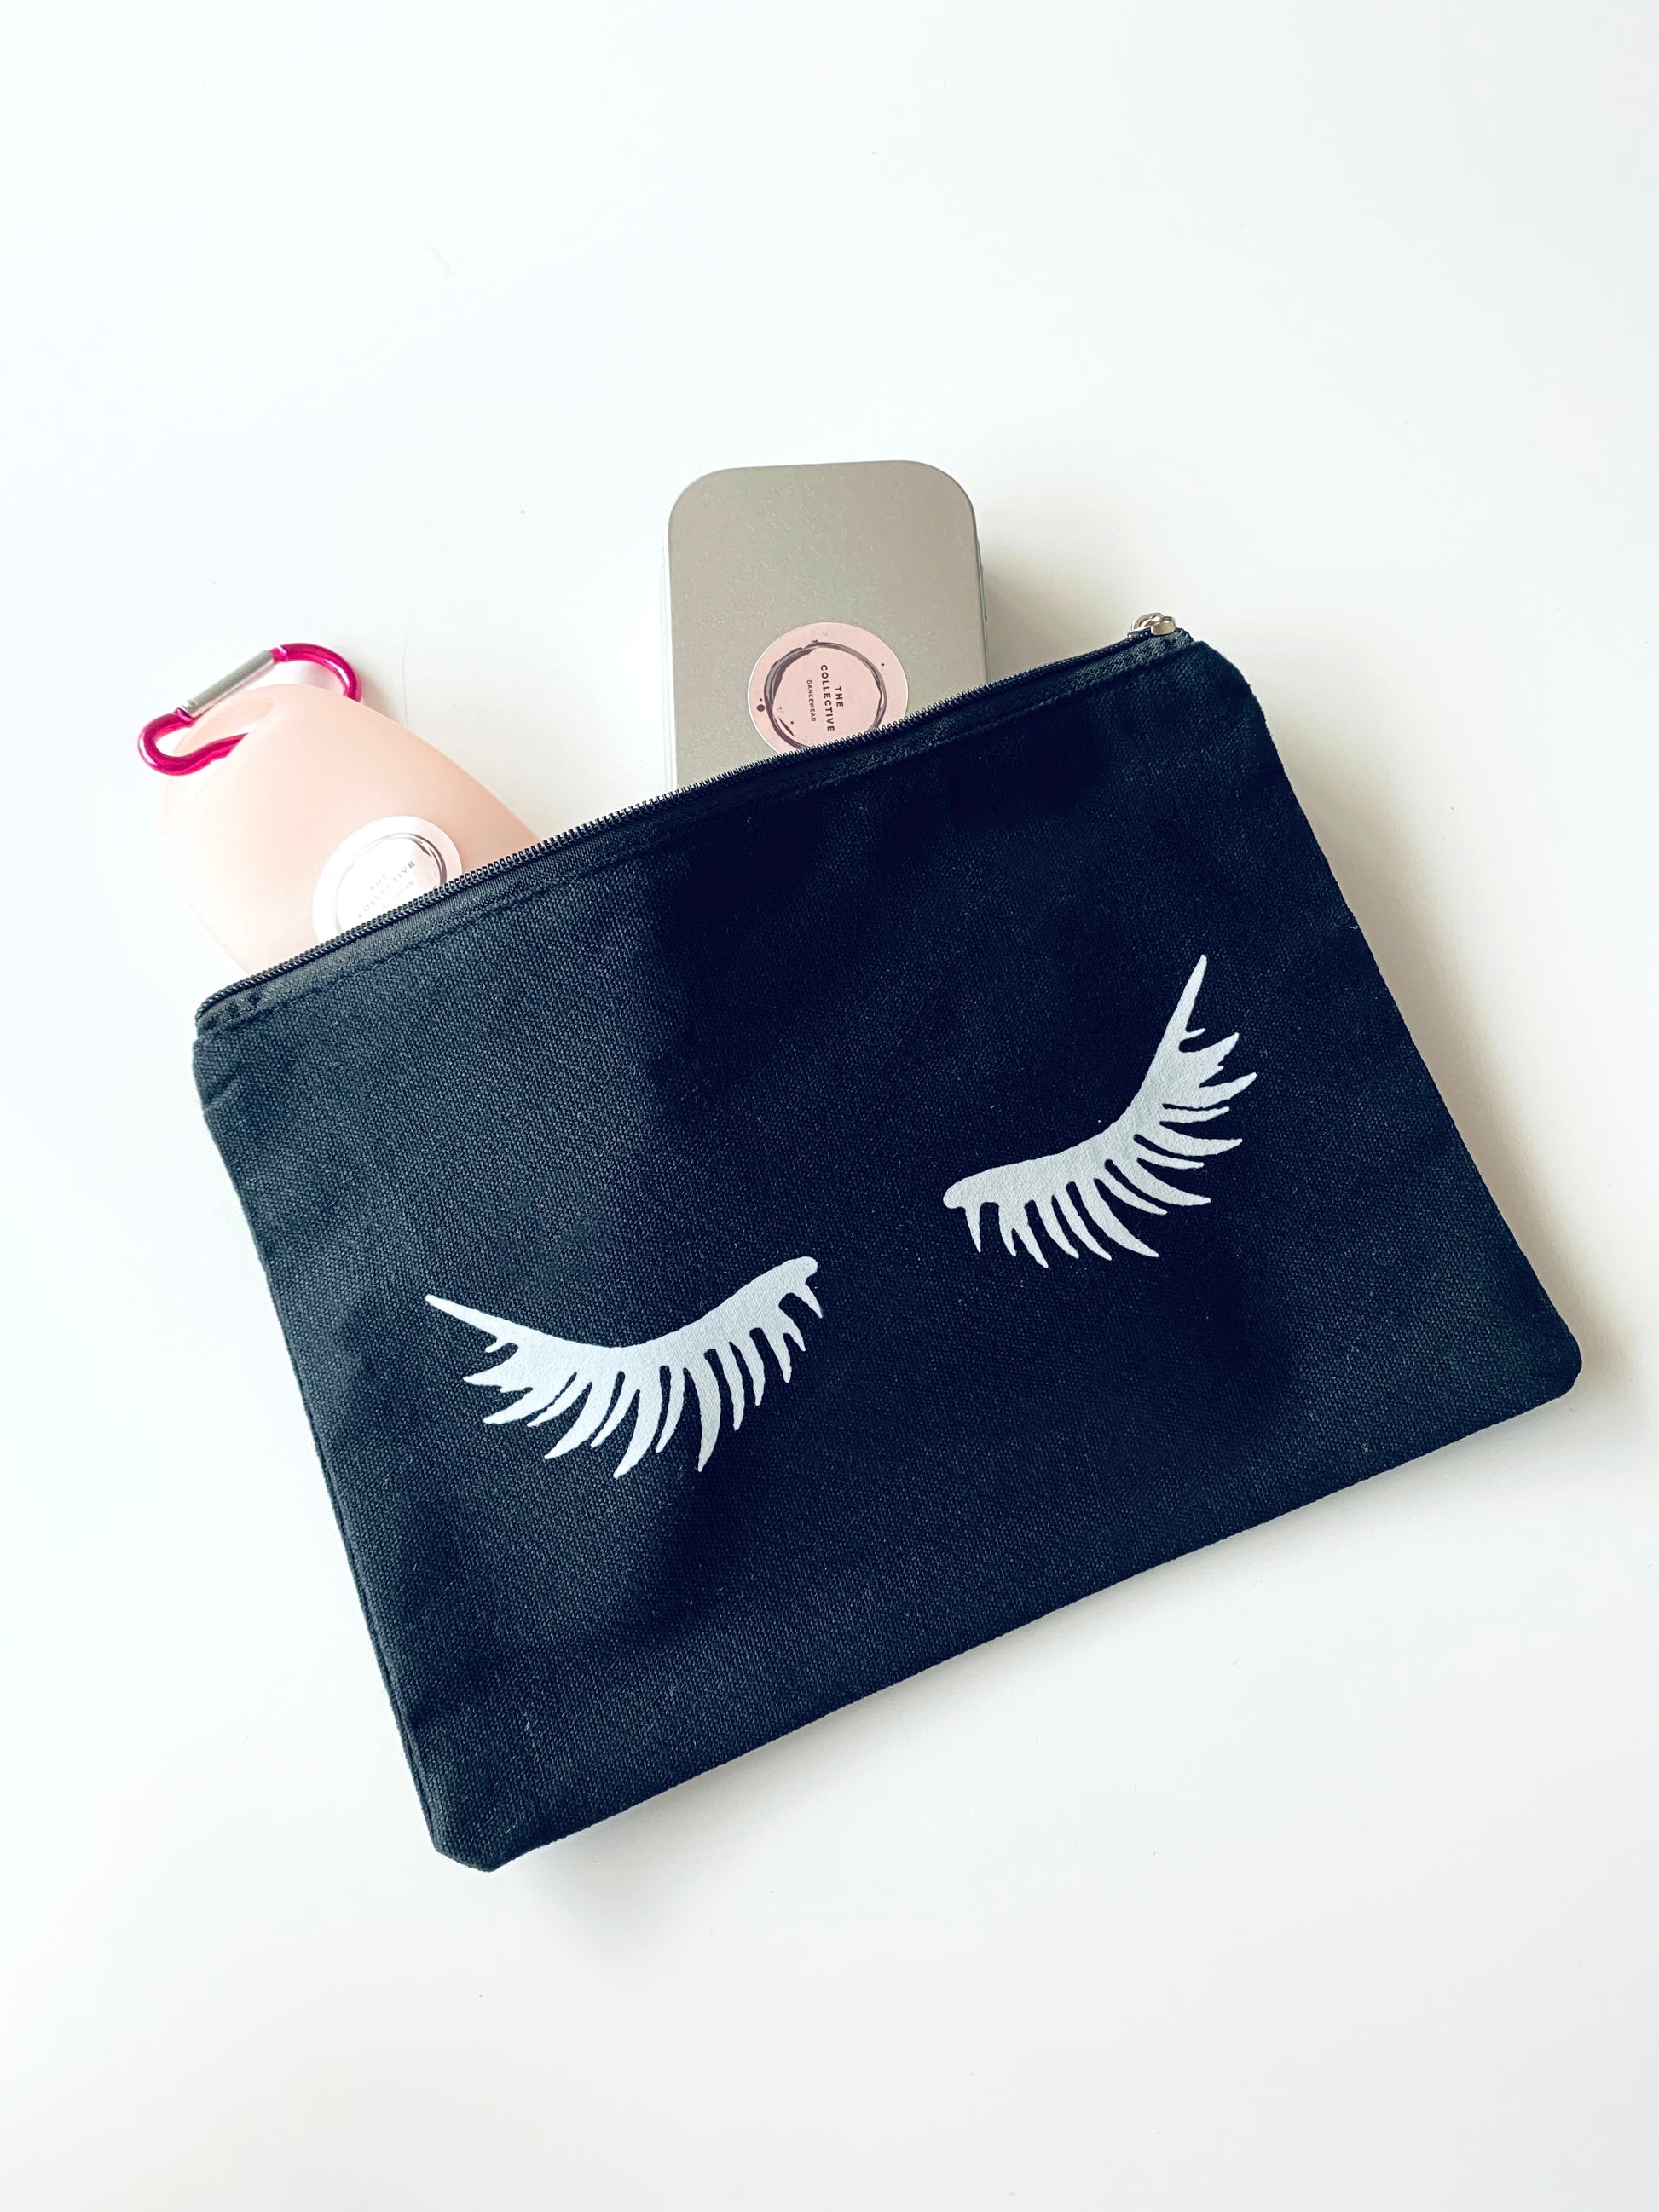 Make up bag for bun kits or hair accessories Lashes from The Collective Dancewear